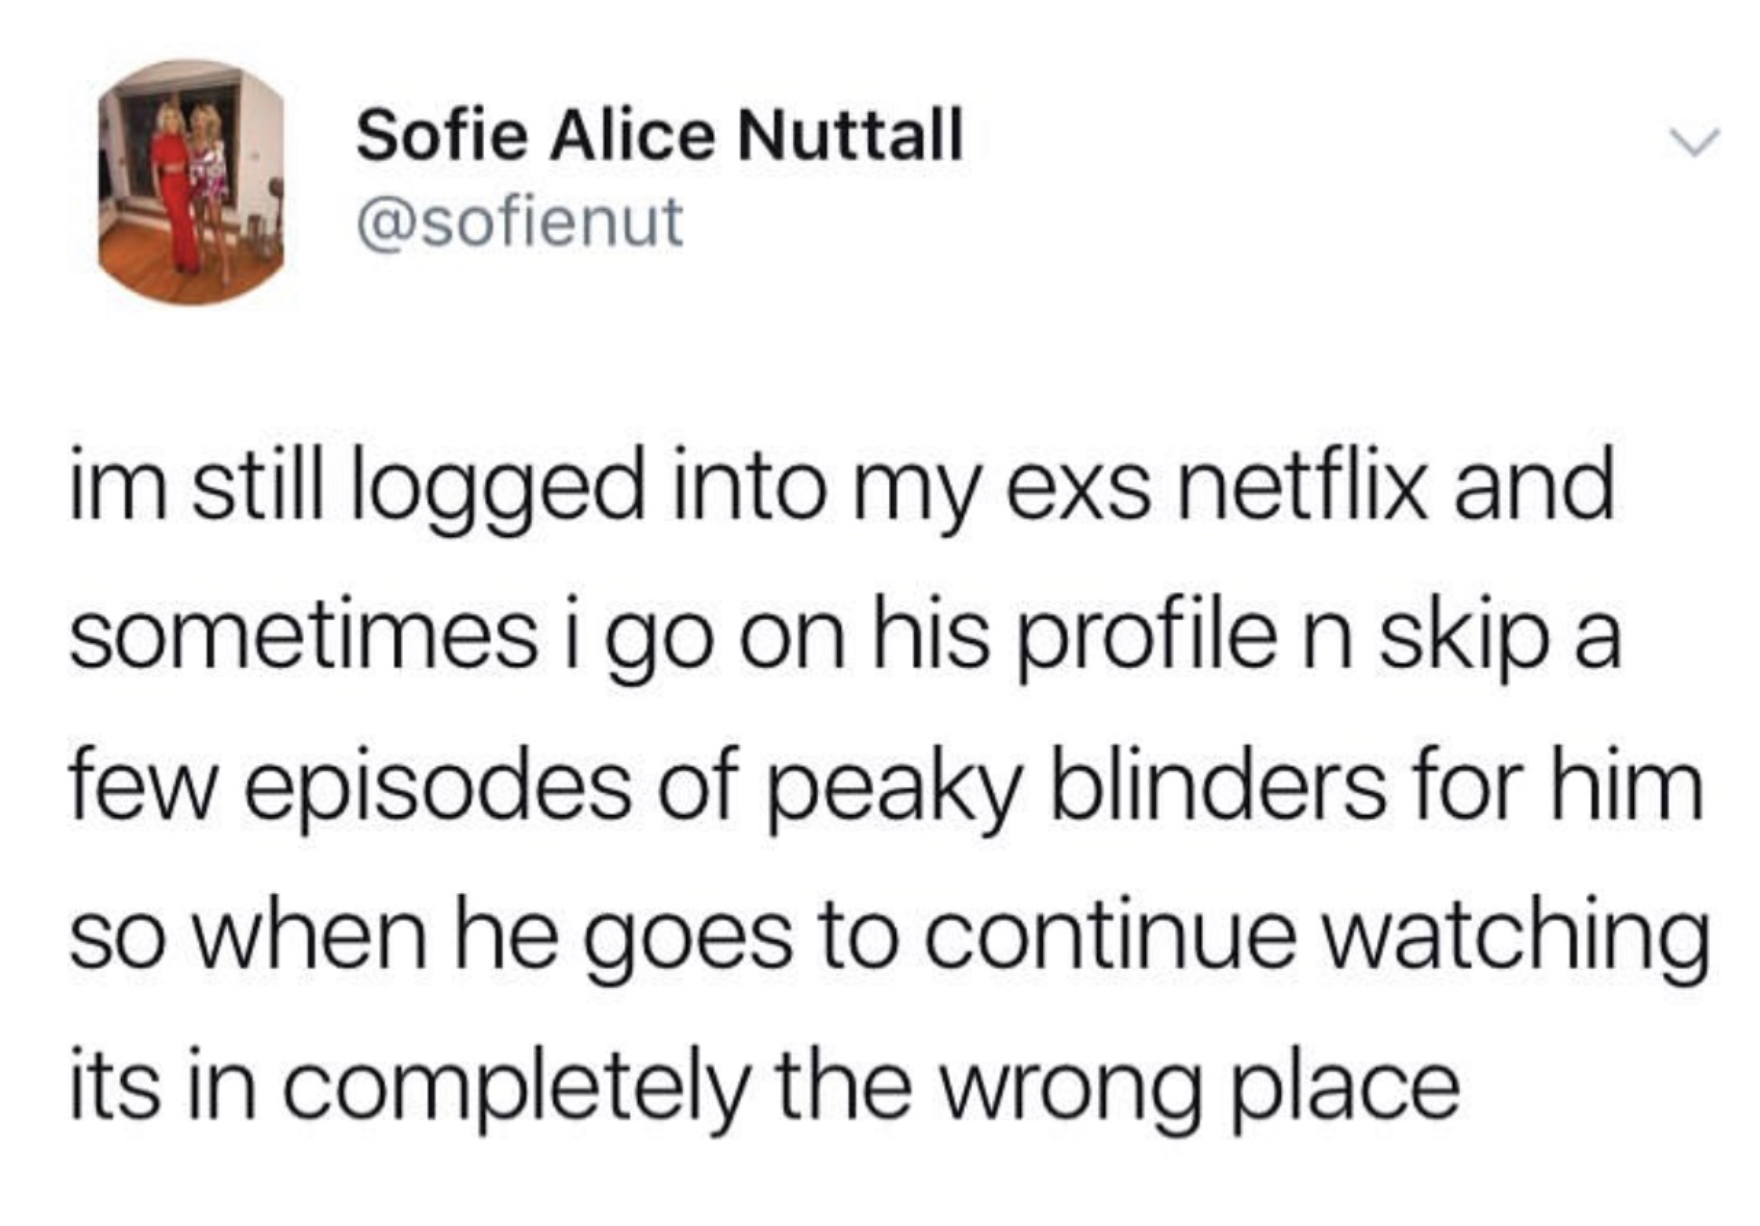 person who skips episodes to mess up someone&#x27;s netflix